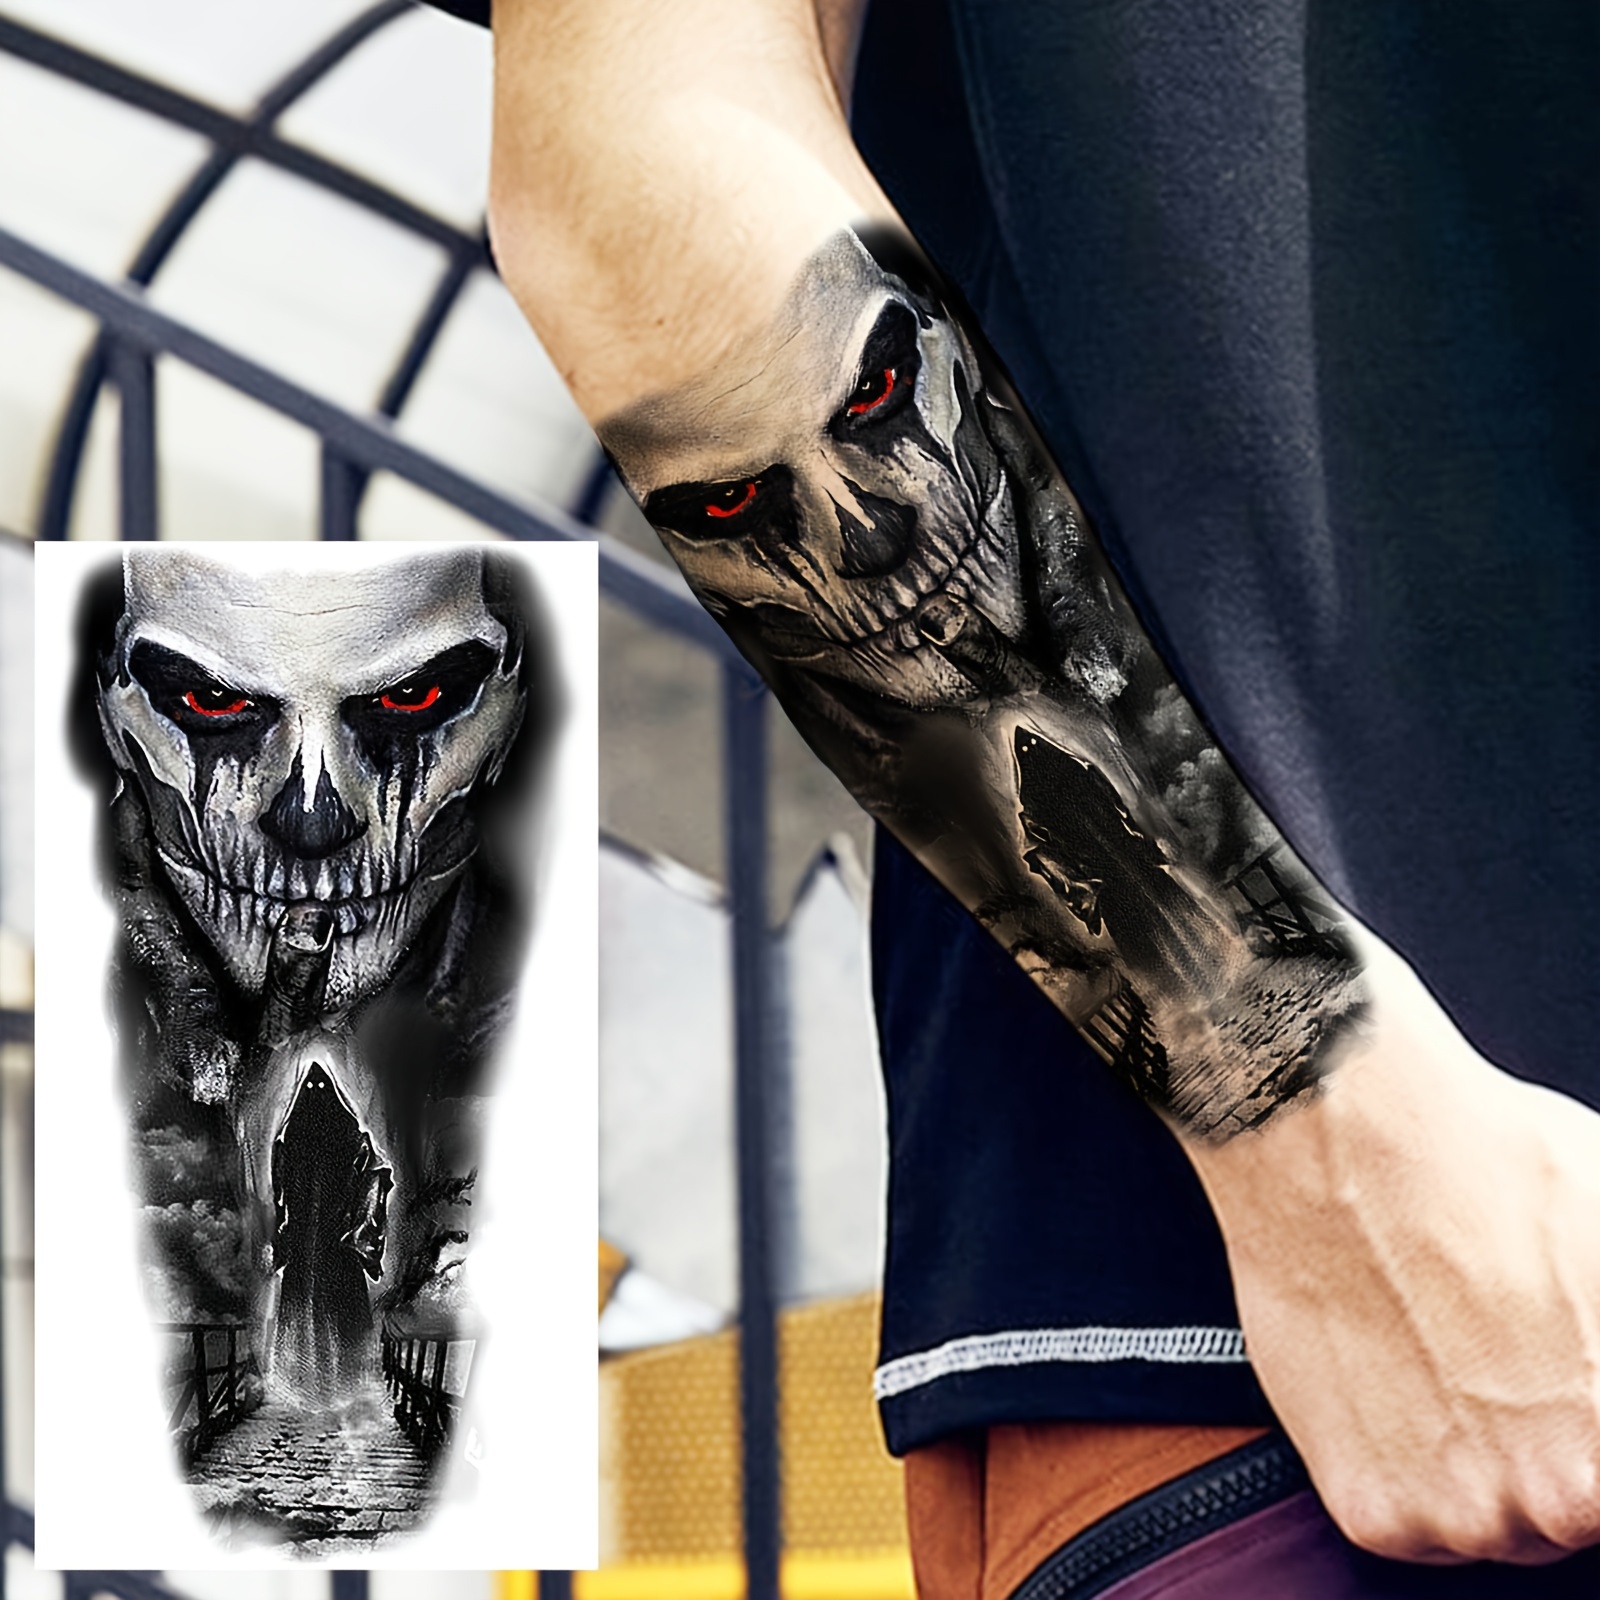 

Realistic Evil Temporary Tattoo Sticker - Waterproof, Long-lasting Body Art For Men & Women, Perfect For Halloween & Parties